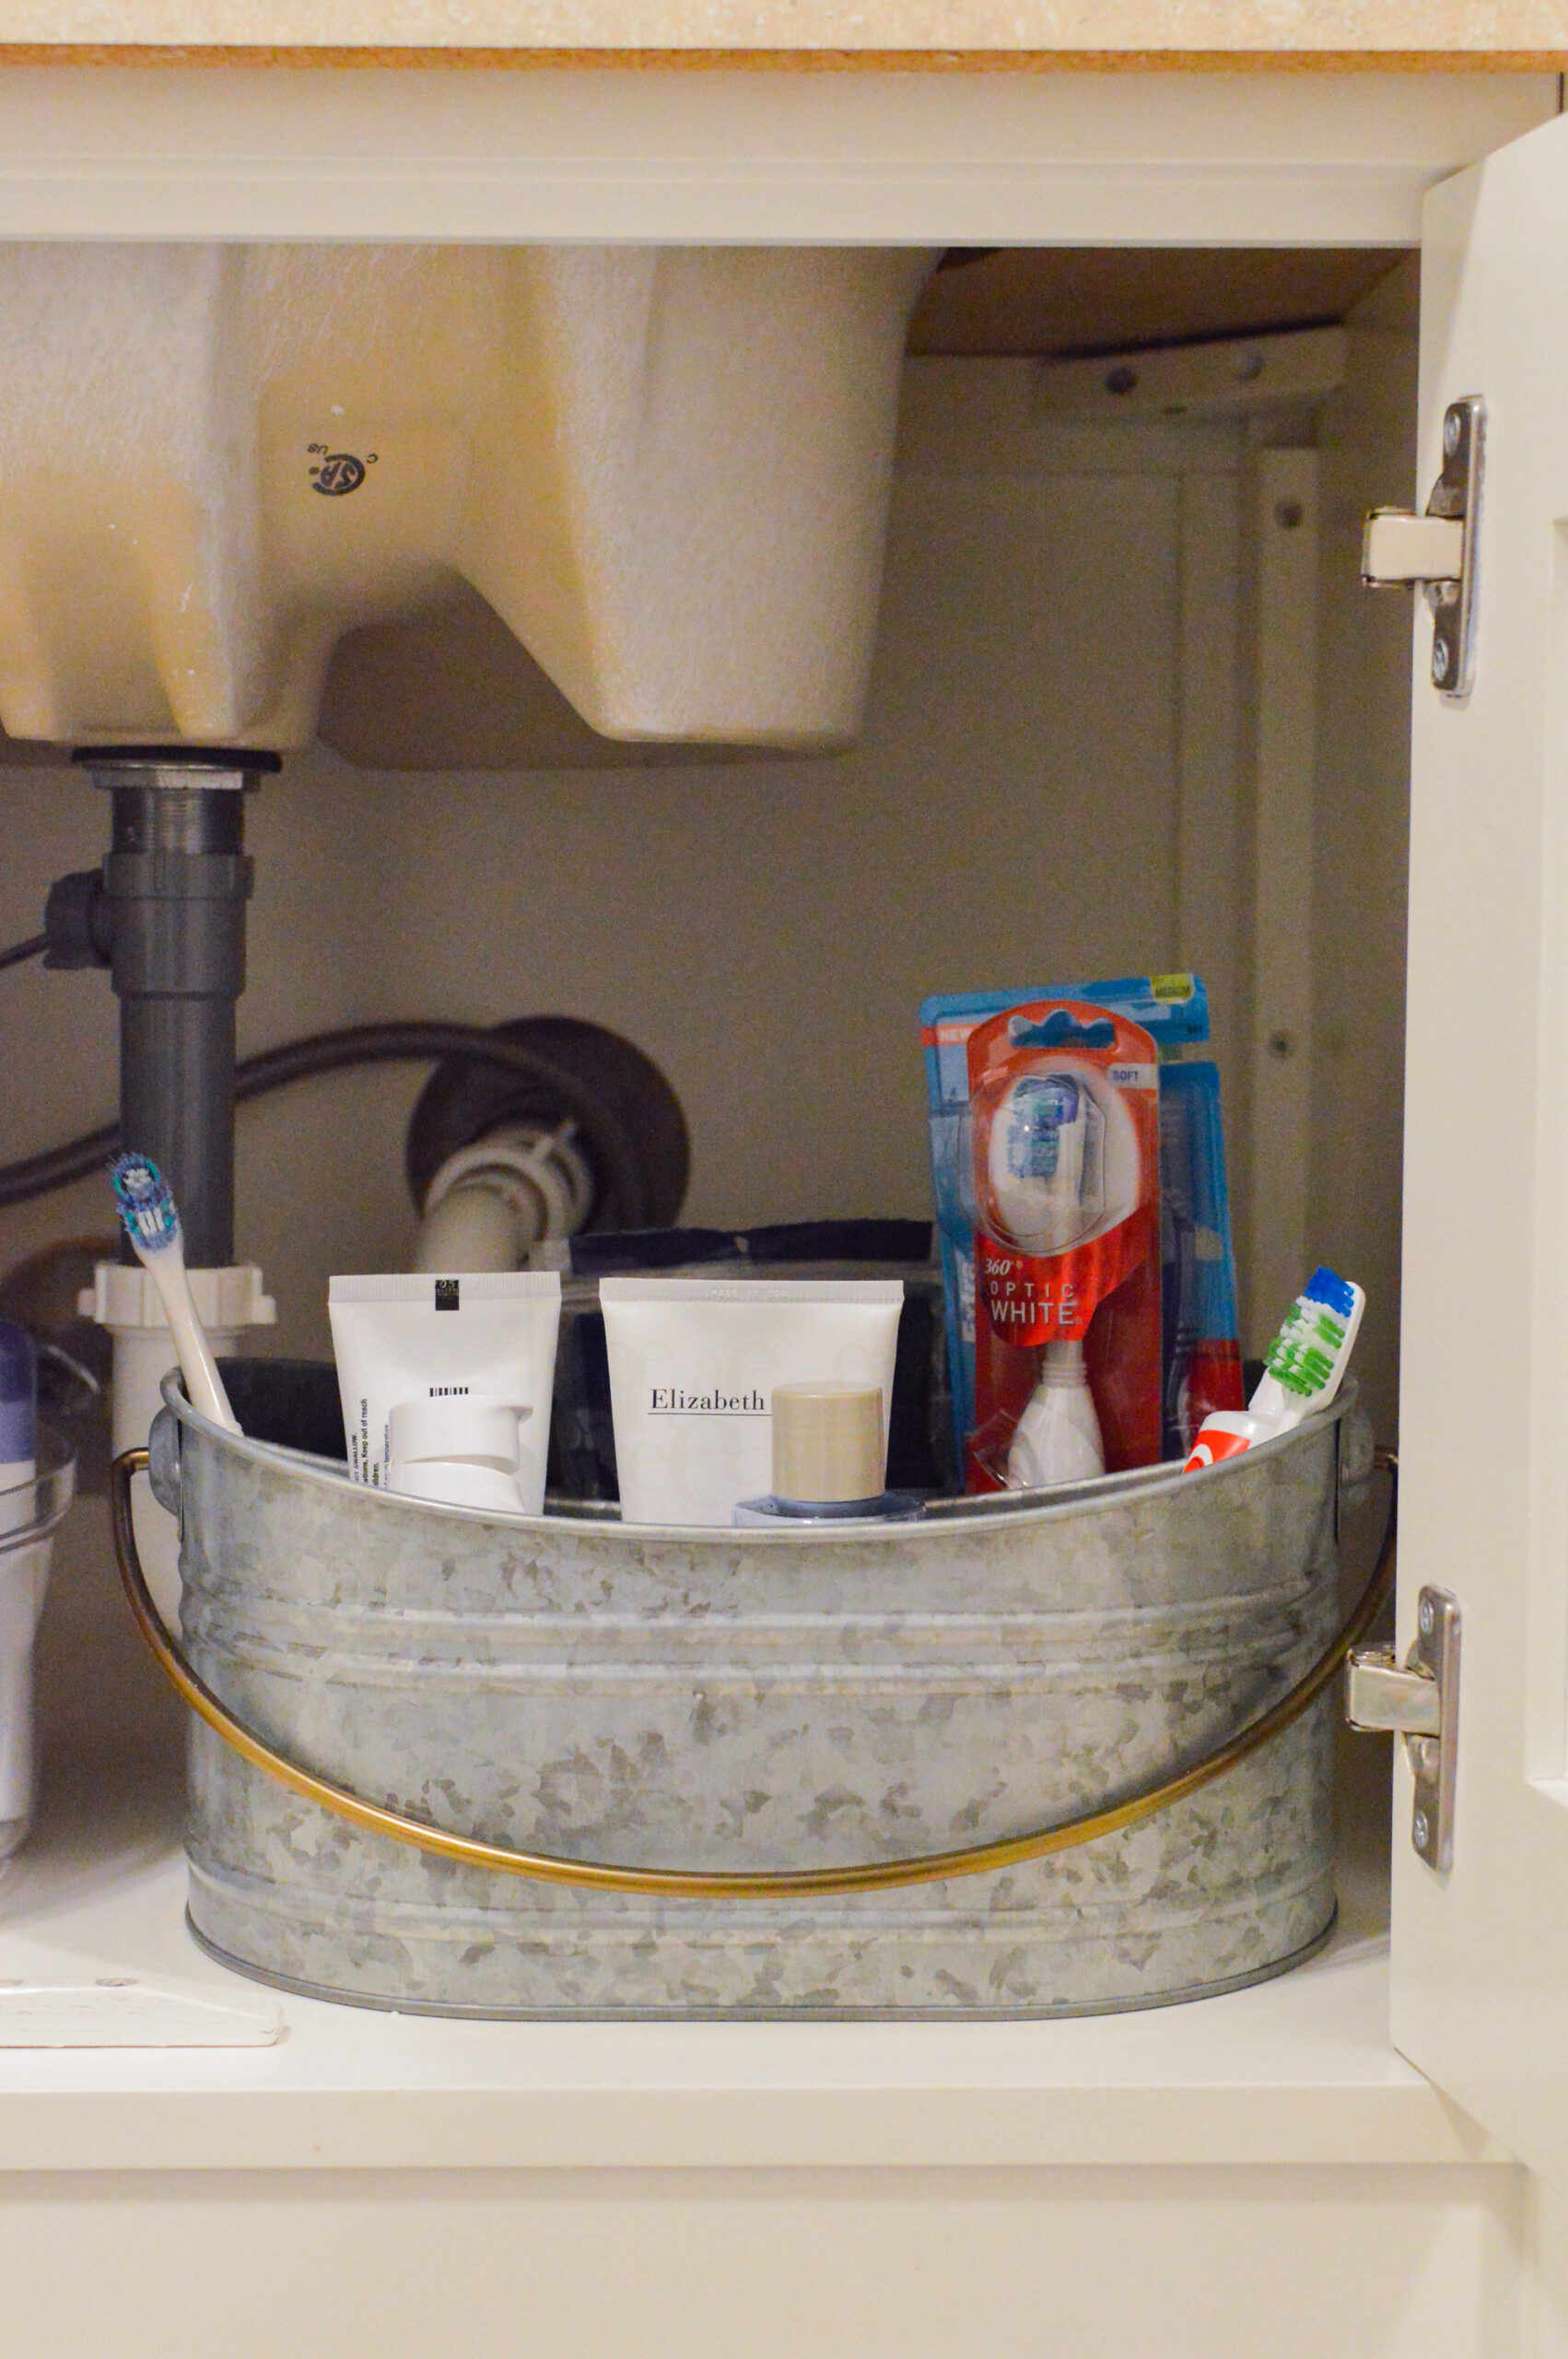 How to organize under the bathroom sink – 10 expert ideas to keep this  space tidy